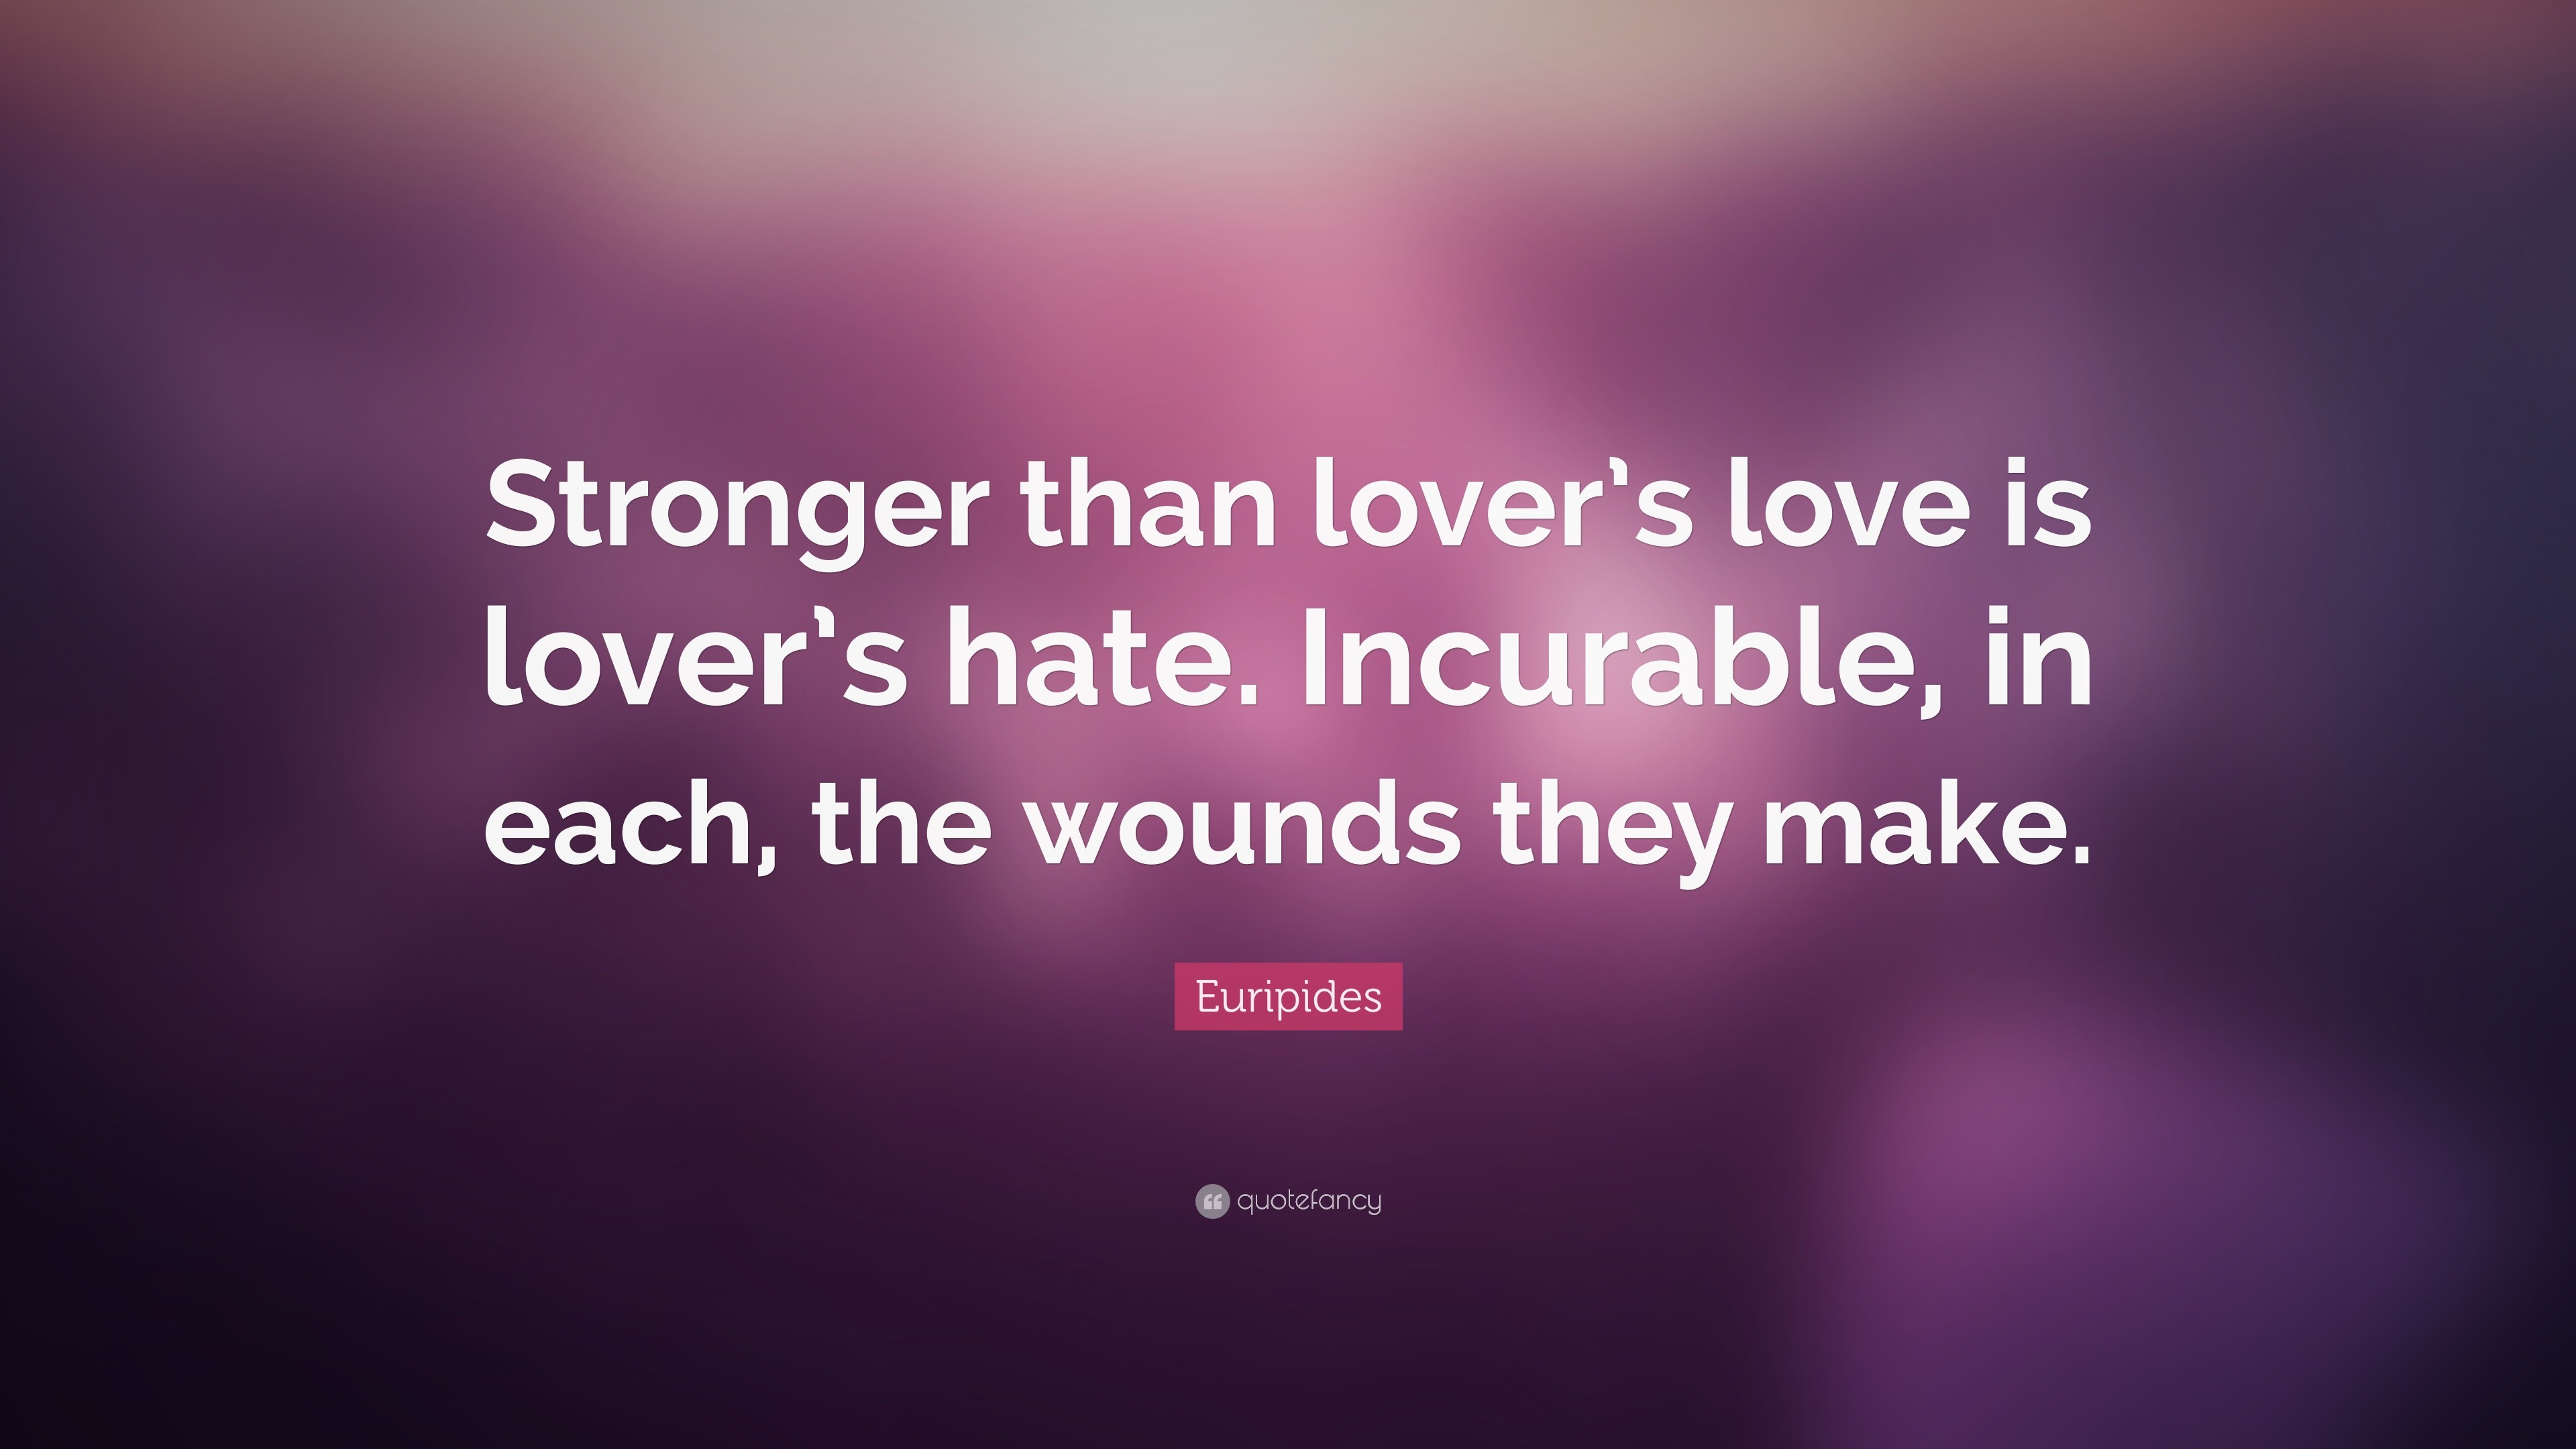 Euripides Quote “Stronger than lover s love is lover s hate Incurable in each